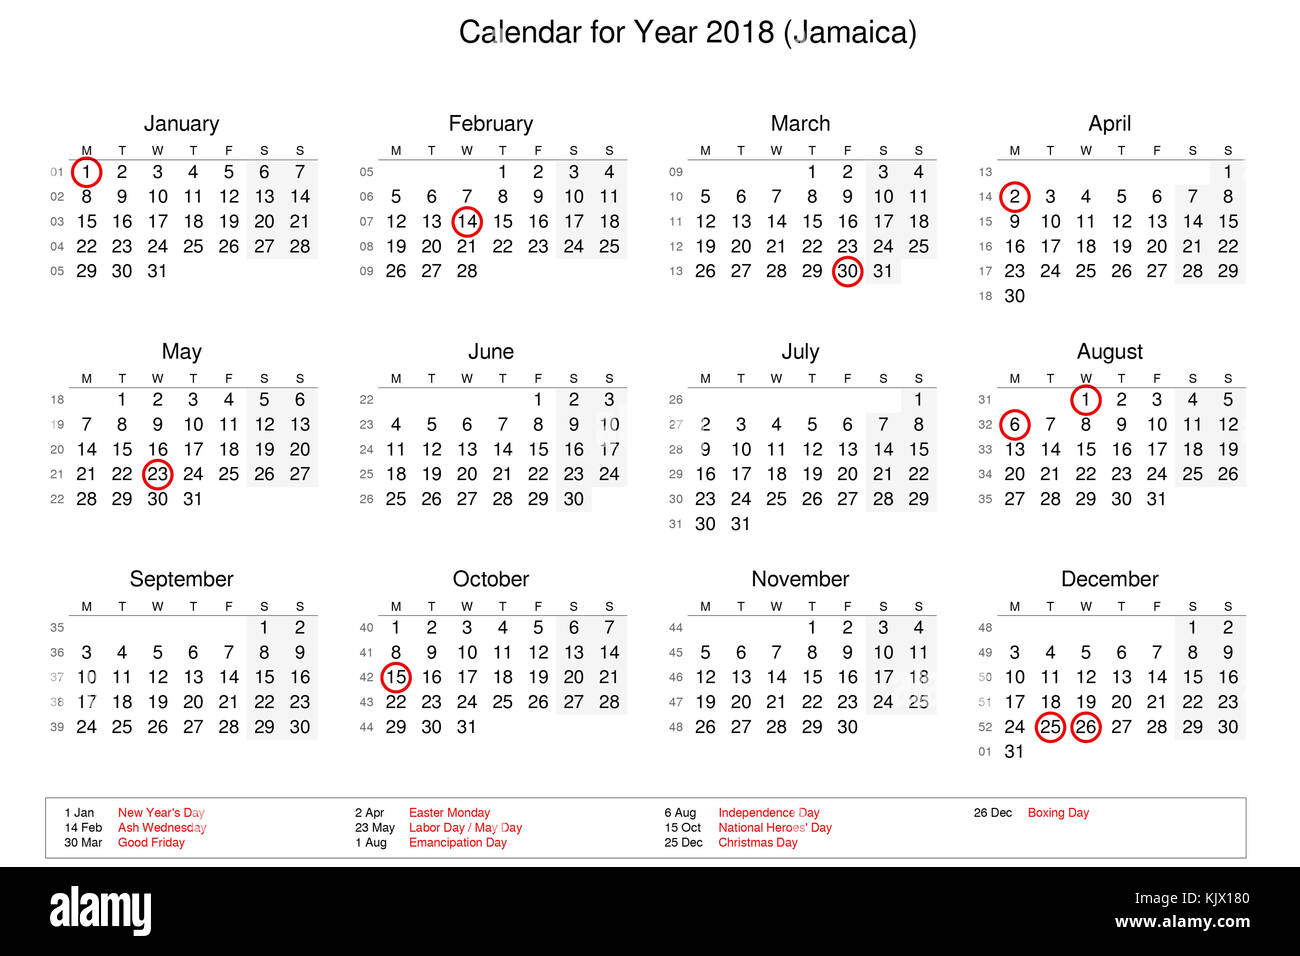 Calendar of year 2018 with public holidays and bank holidays for Jamaica Stock Photo